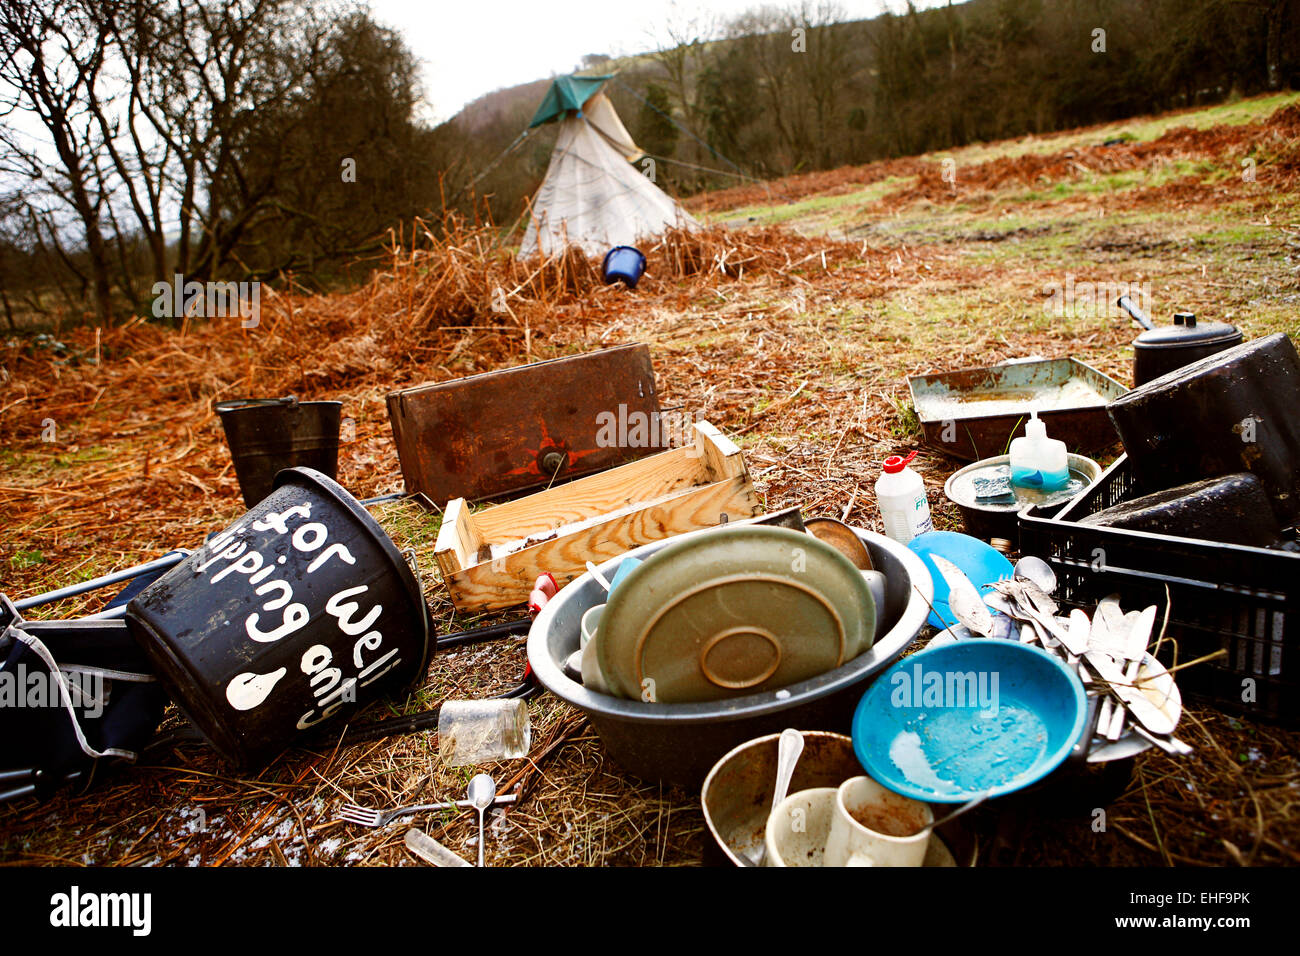 Washing up outside a tipi at Tipi Valley an eco community near Talley in Wales. Stock Photo